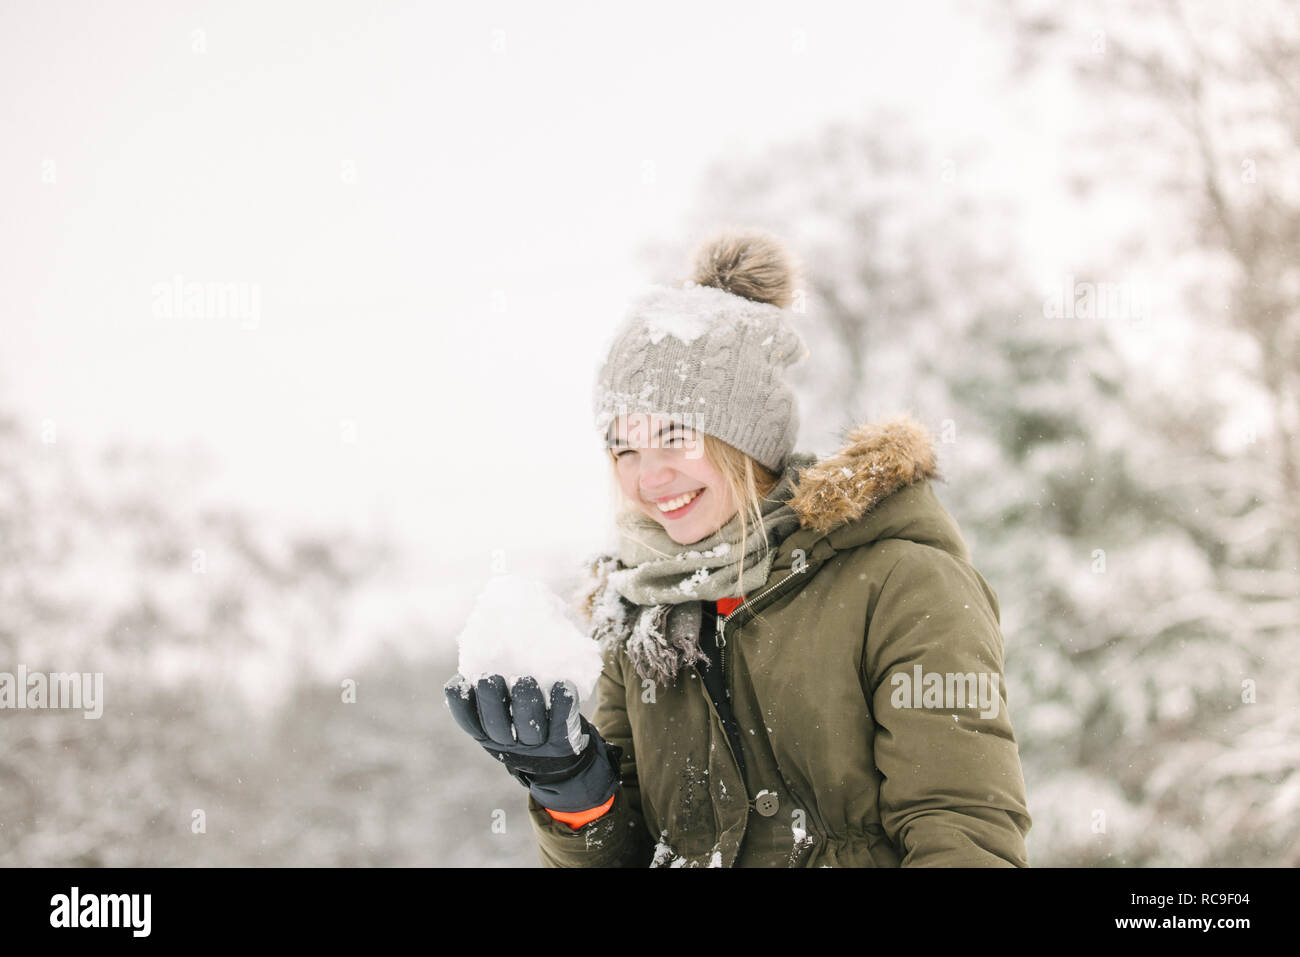 Girl with snow ball in winter landscape Stock Photo